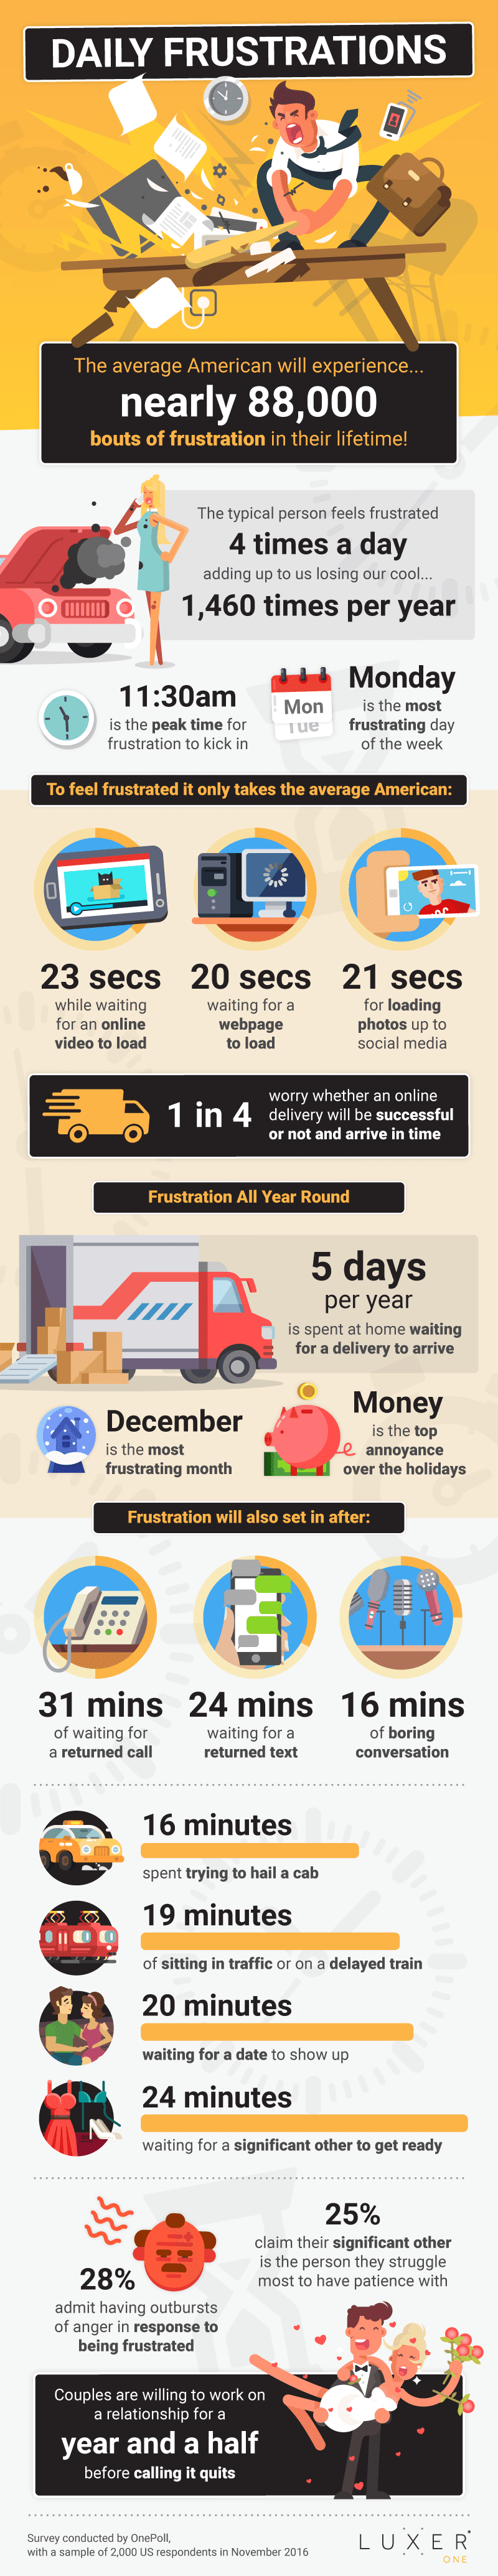 daily-frustrations_infographic_final_web